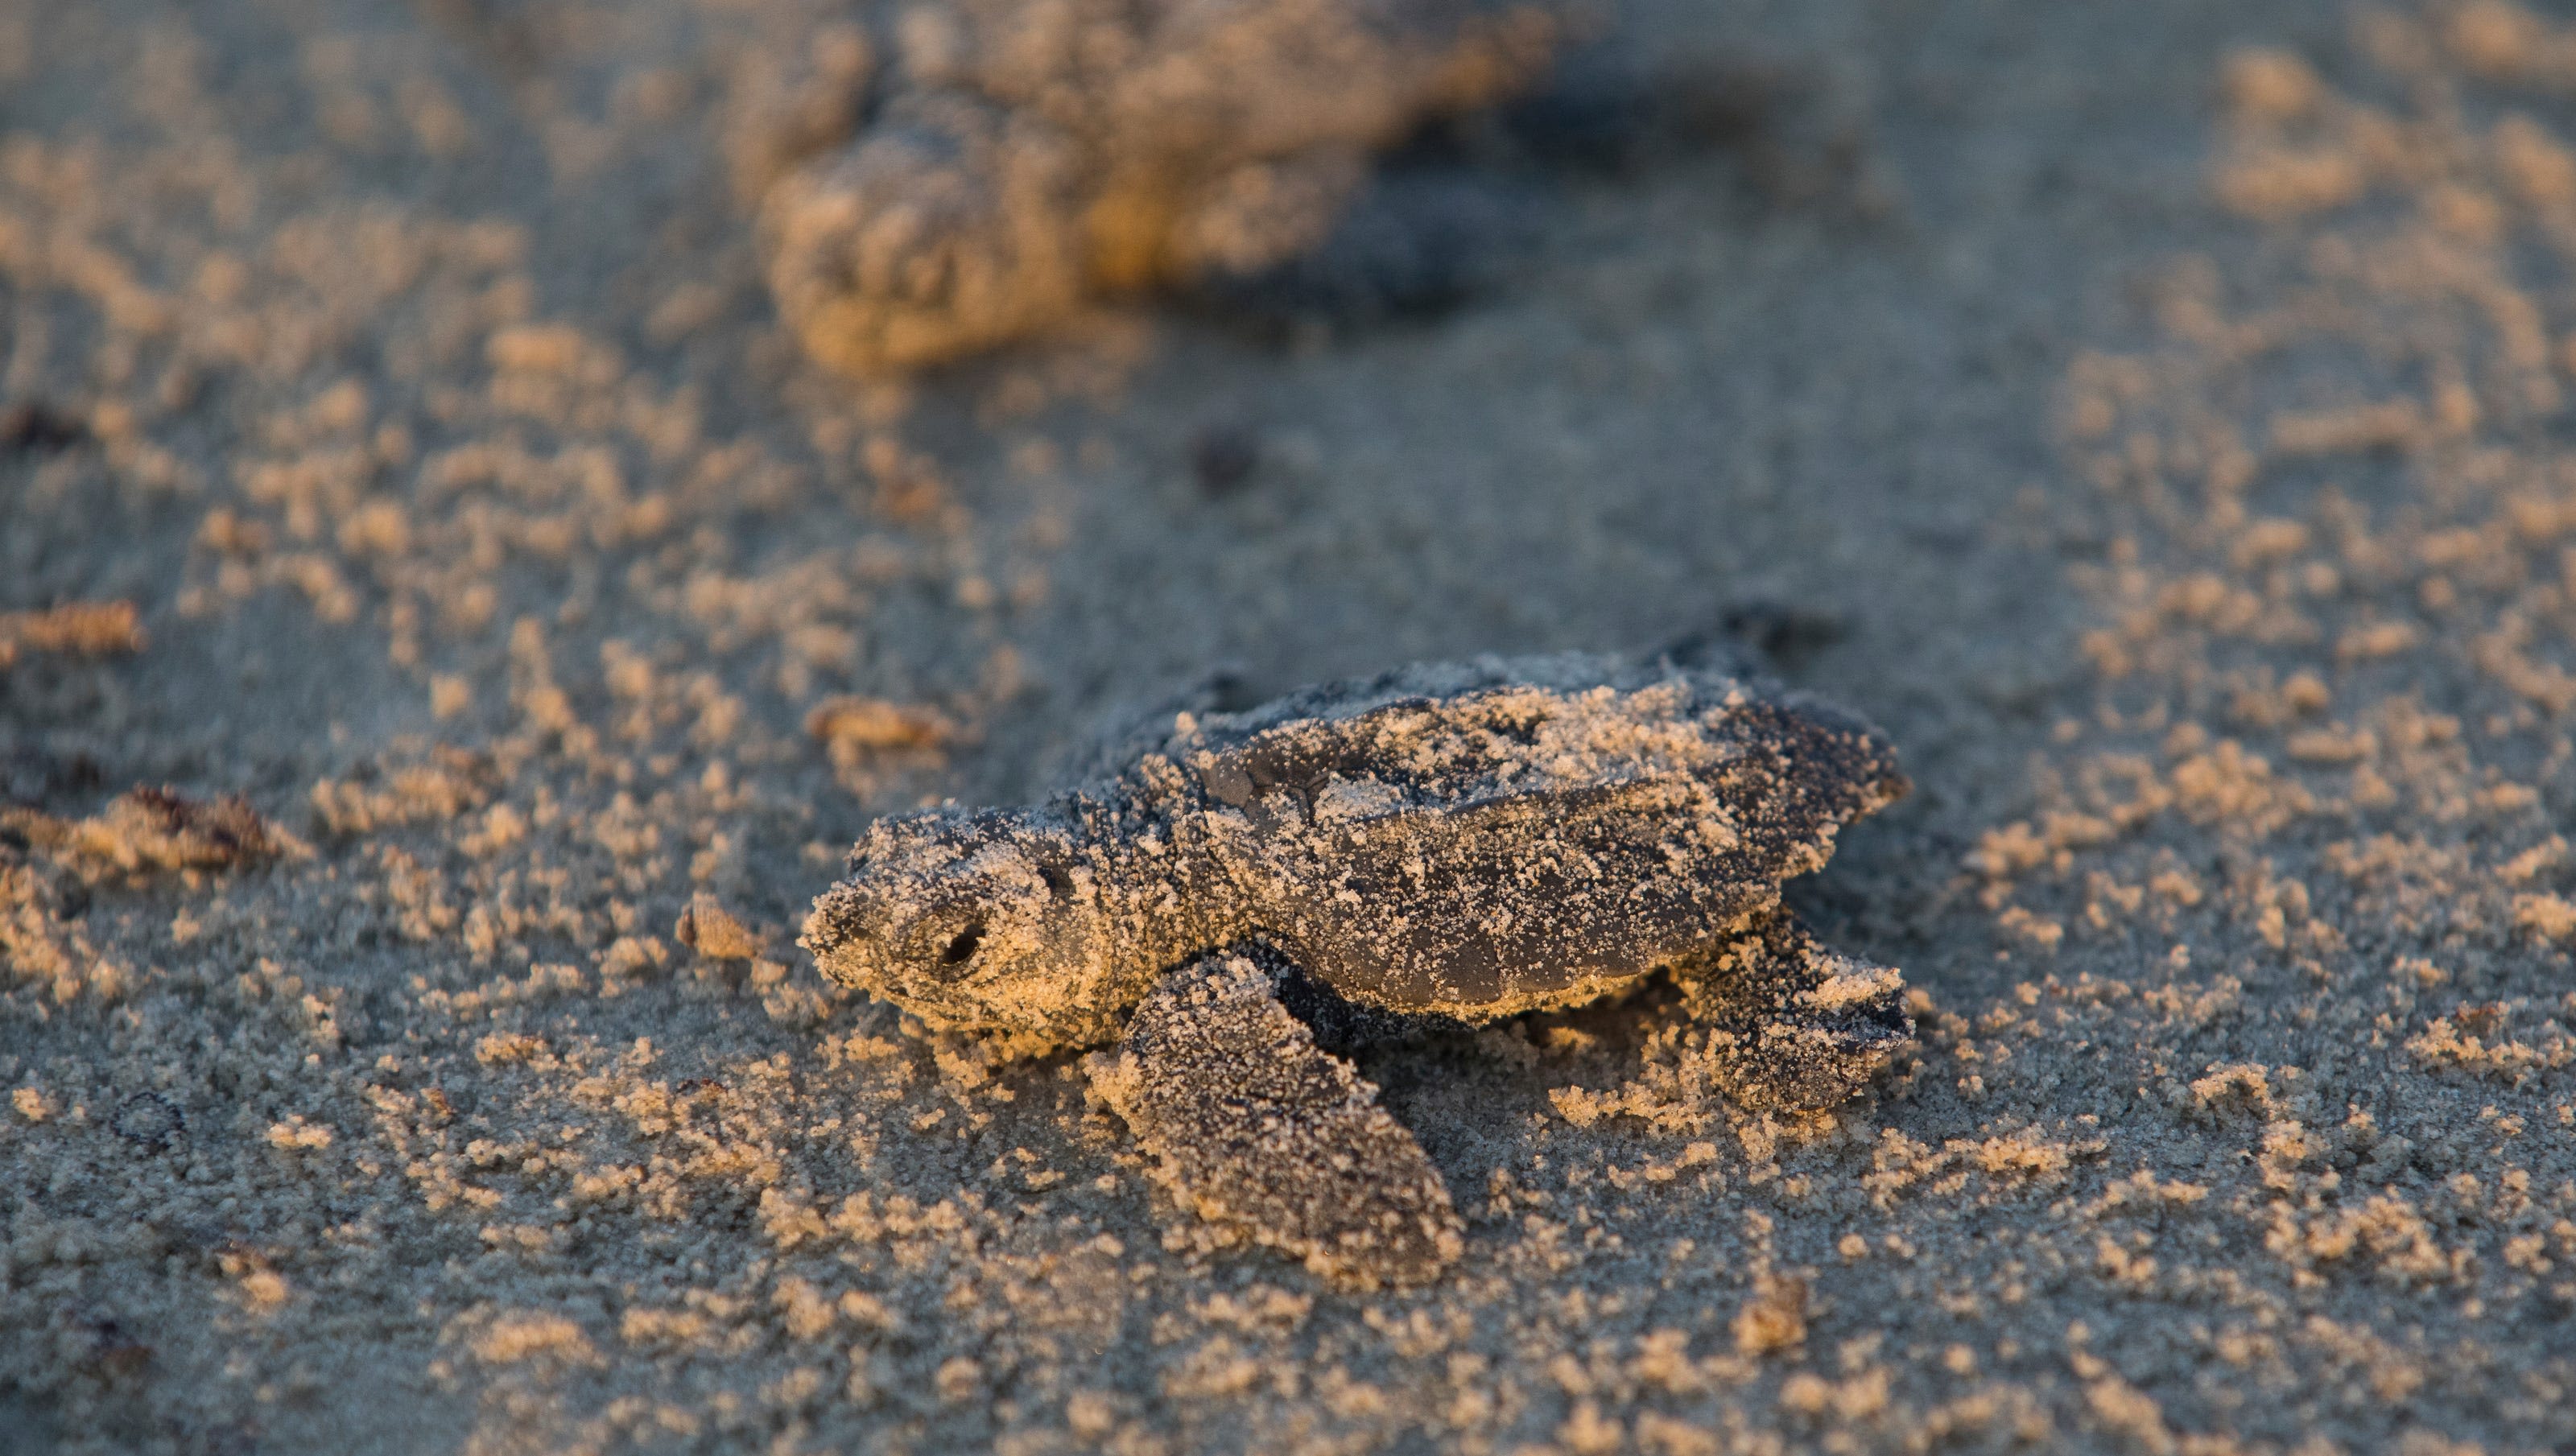 Find a mysterious box on the beach in Texas? Scientists say it has to do with sea turtles